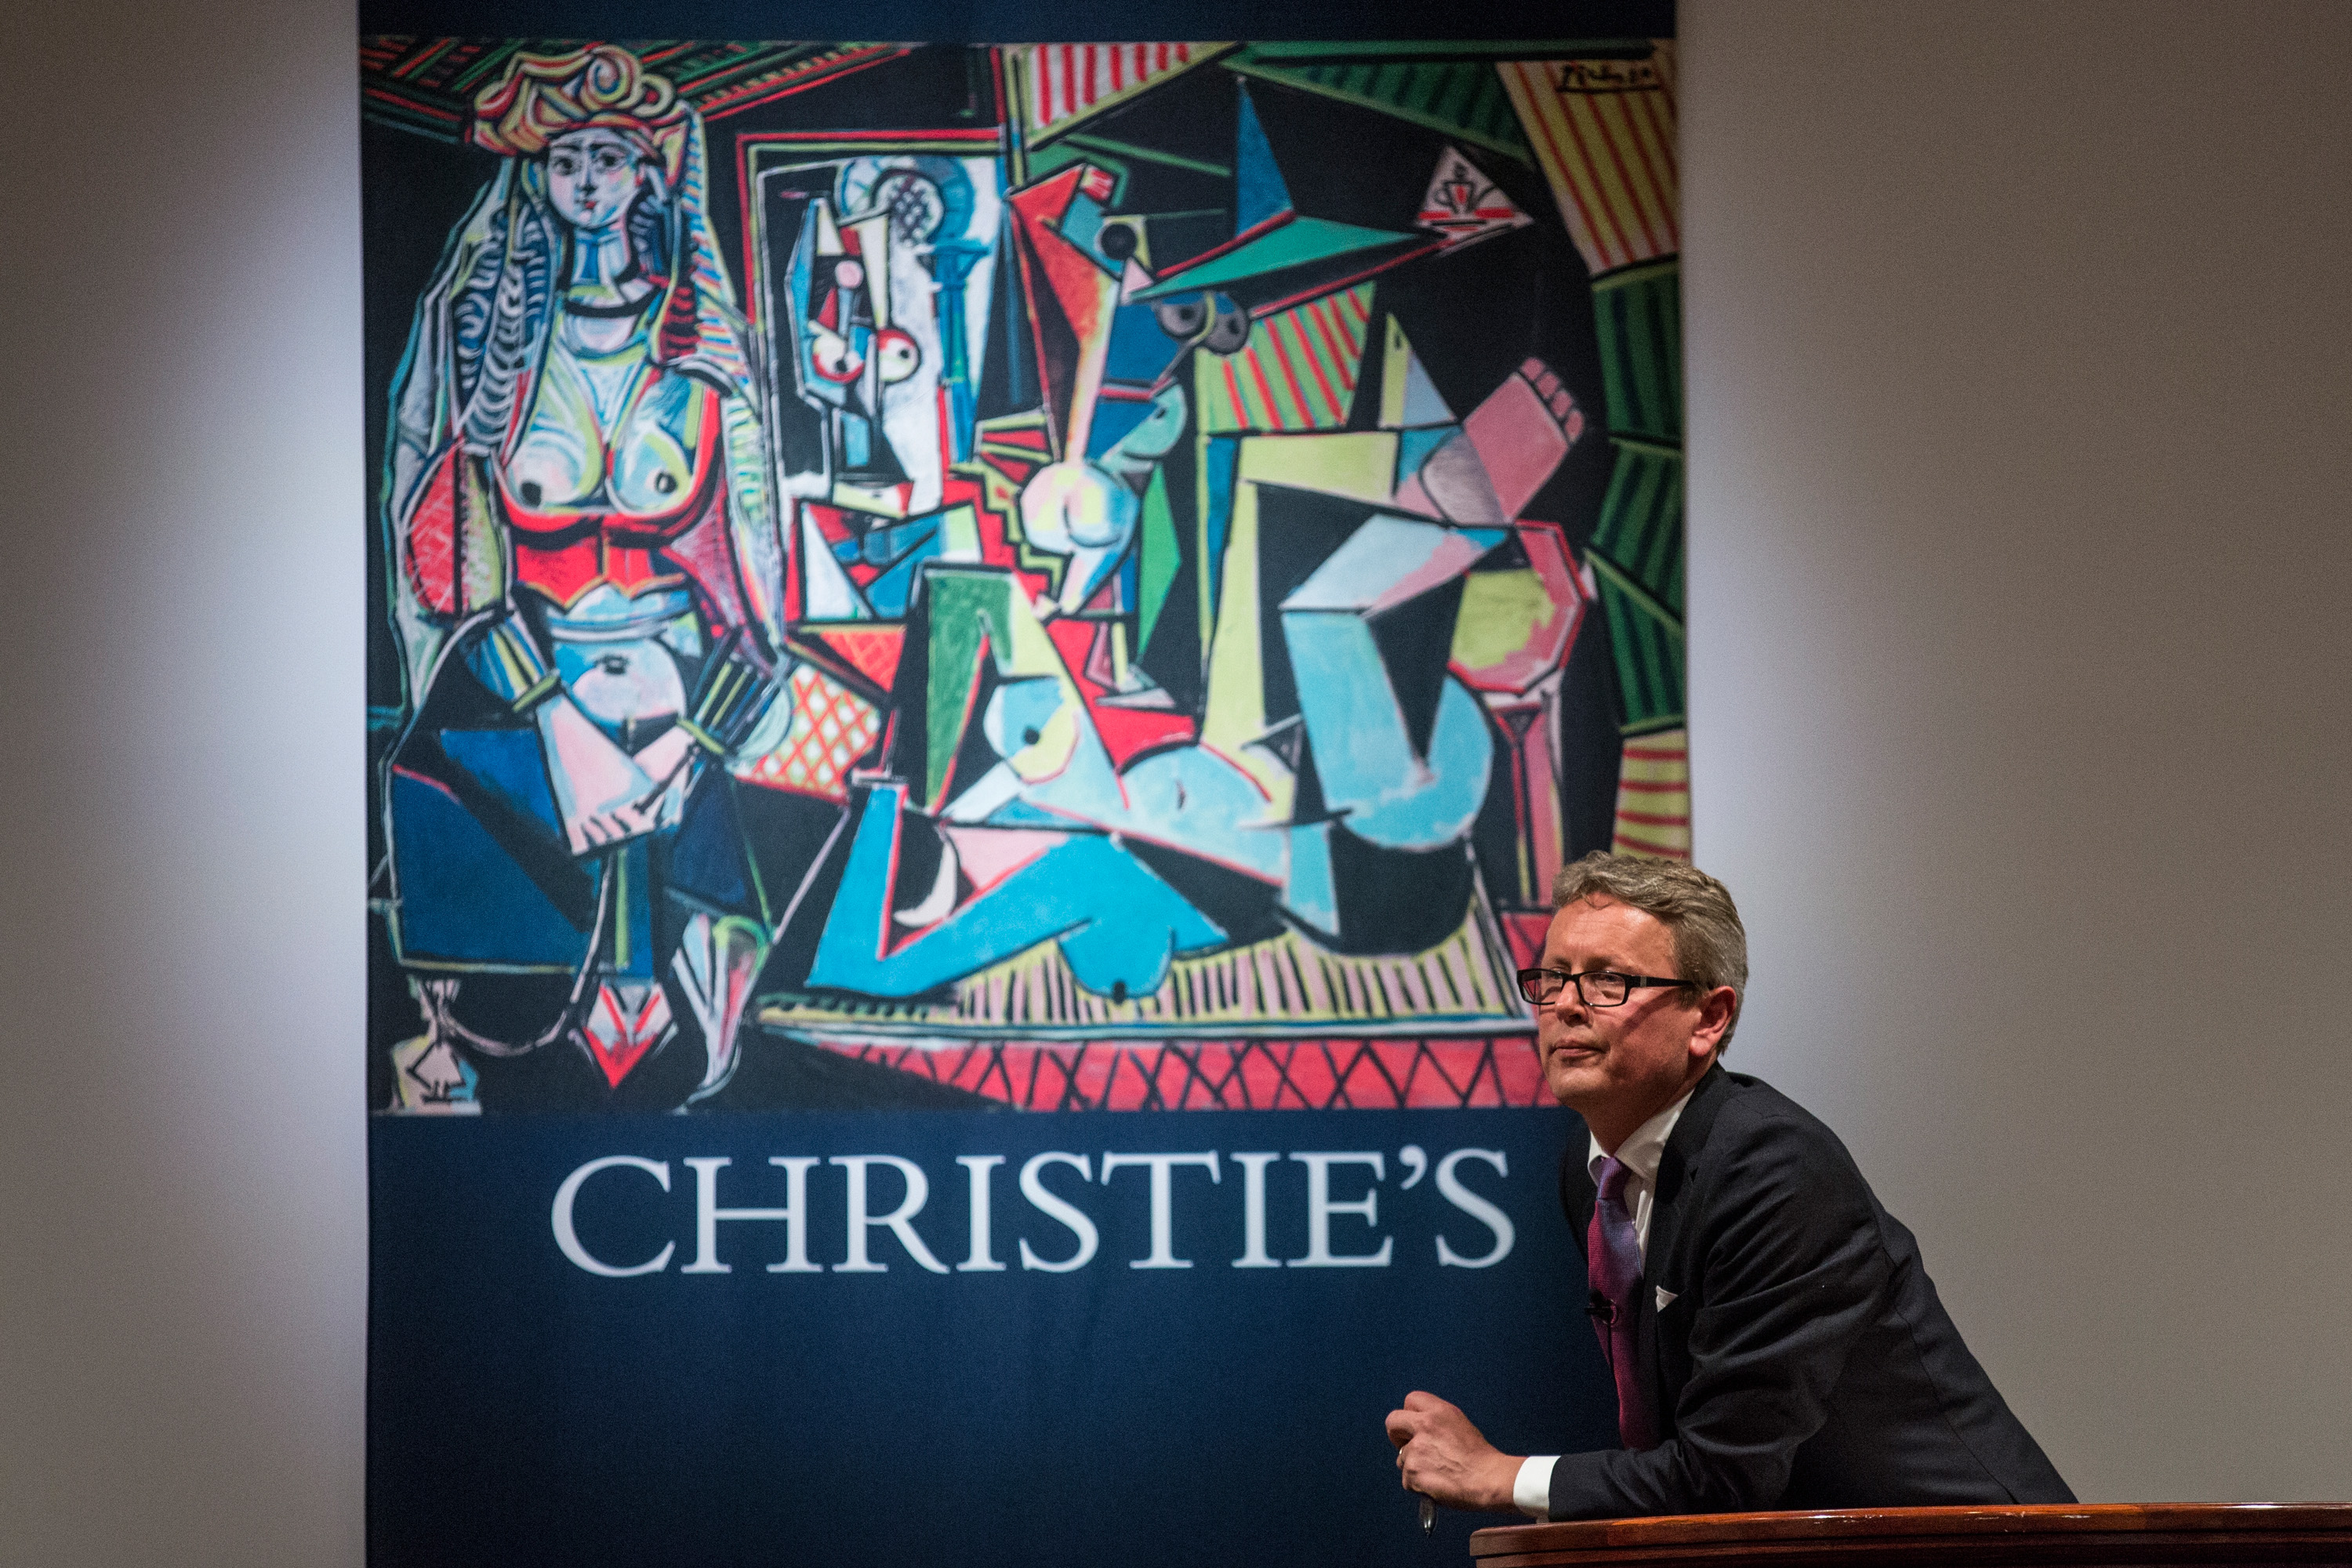 Jussi Pylkkanen, president of Christie's, takes bids at an auction for the art work, "Les femmes d'Alger (Version O)" painted by Pablo Picasso, at Christie's on May 11, 2015 in New York City